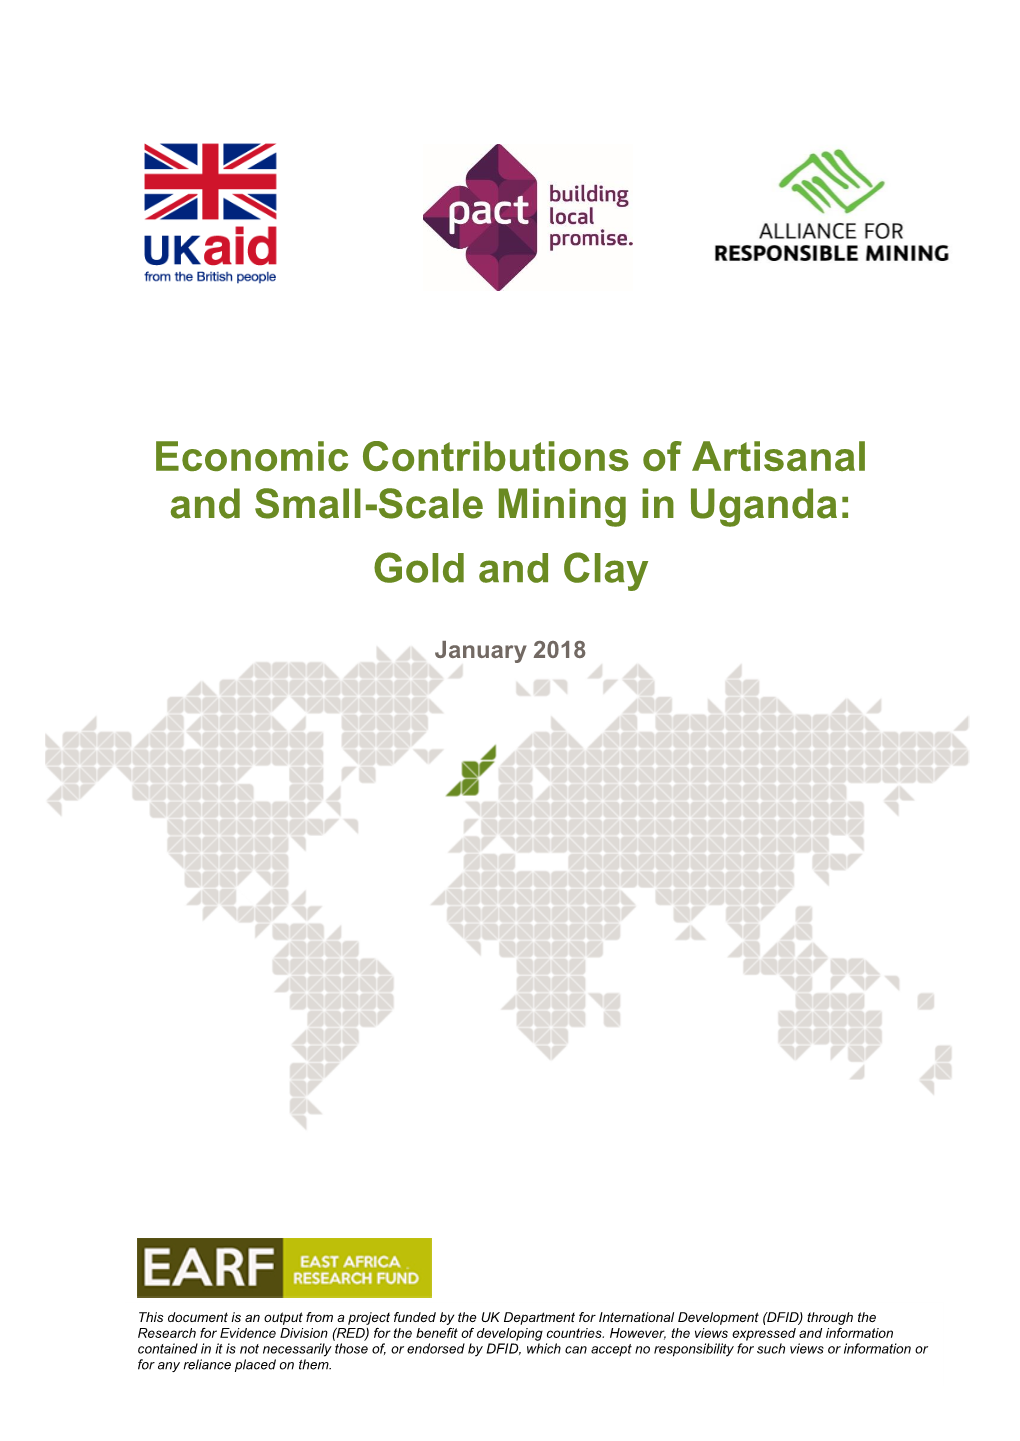 Economic Contributions of Artisanal and Small-Scale Mining in Uganda: Gold and Clay